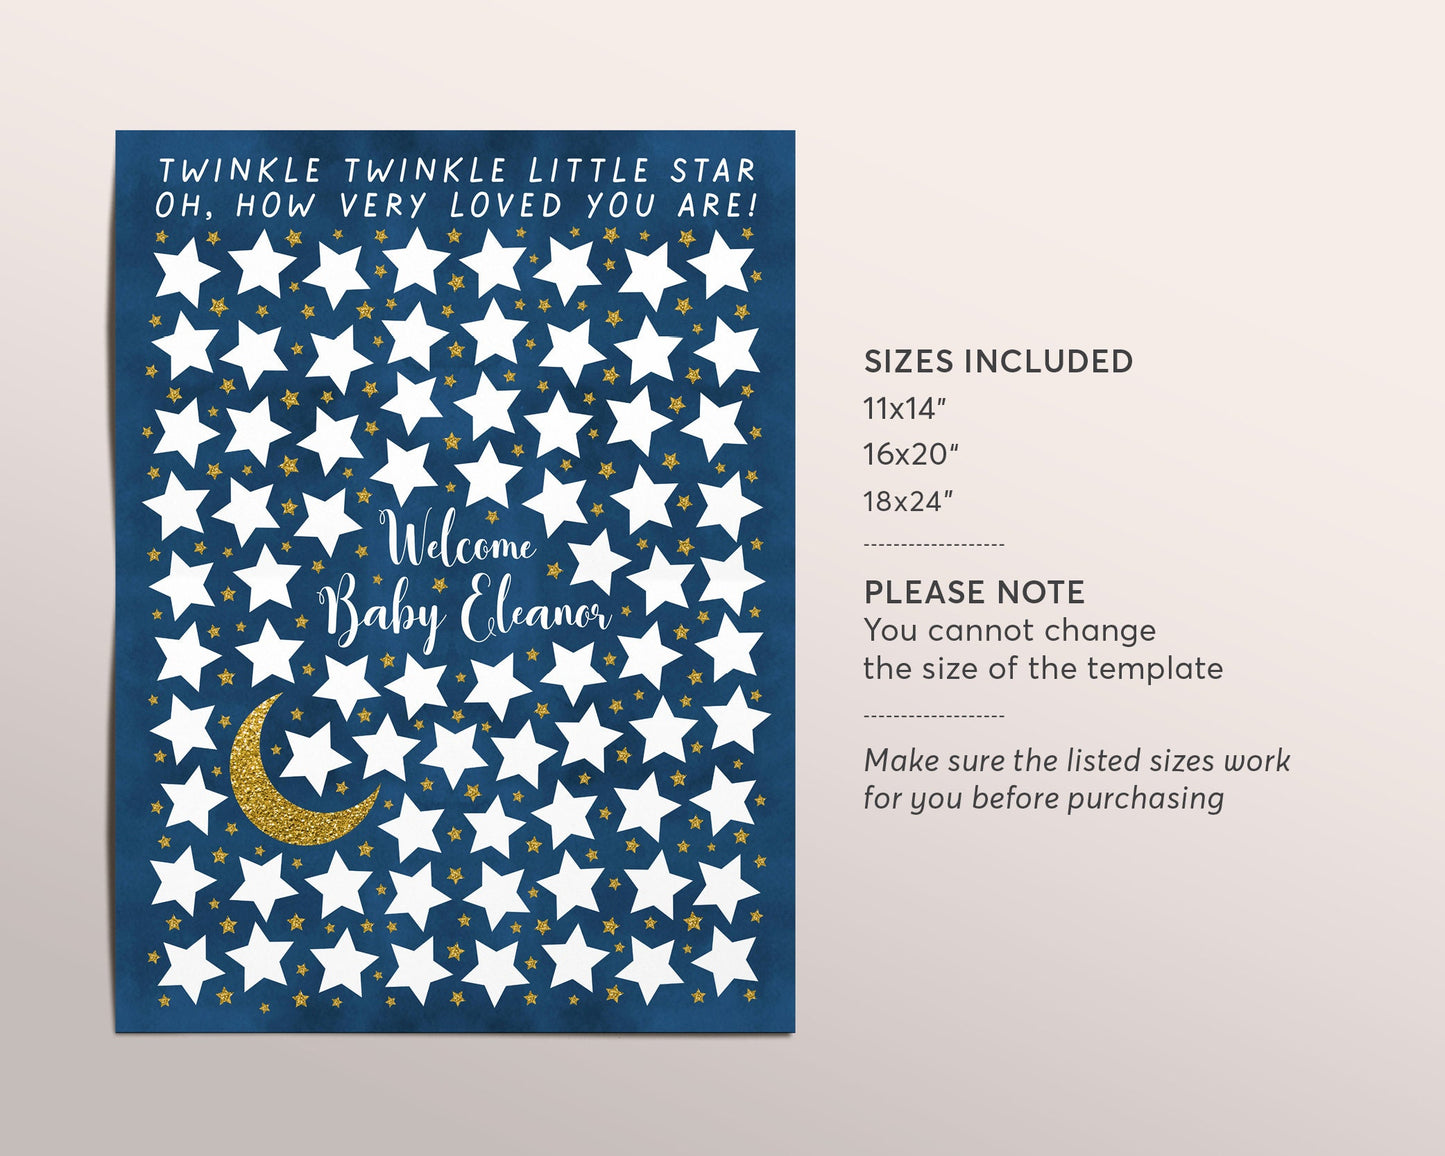 Editable Twinkle Twinkle Little Star Baby Shower Guest Book Alternative Template, Sign a Star, Galaxy Moon Stars Gender Neutral Guestbook